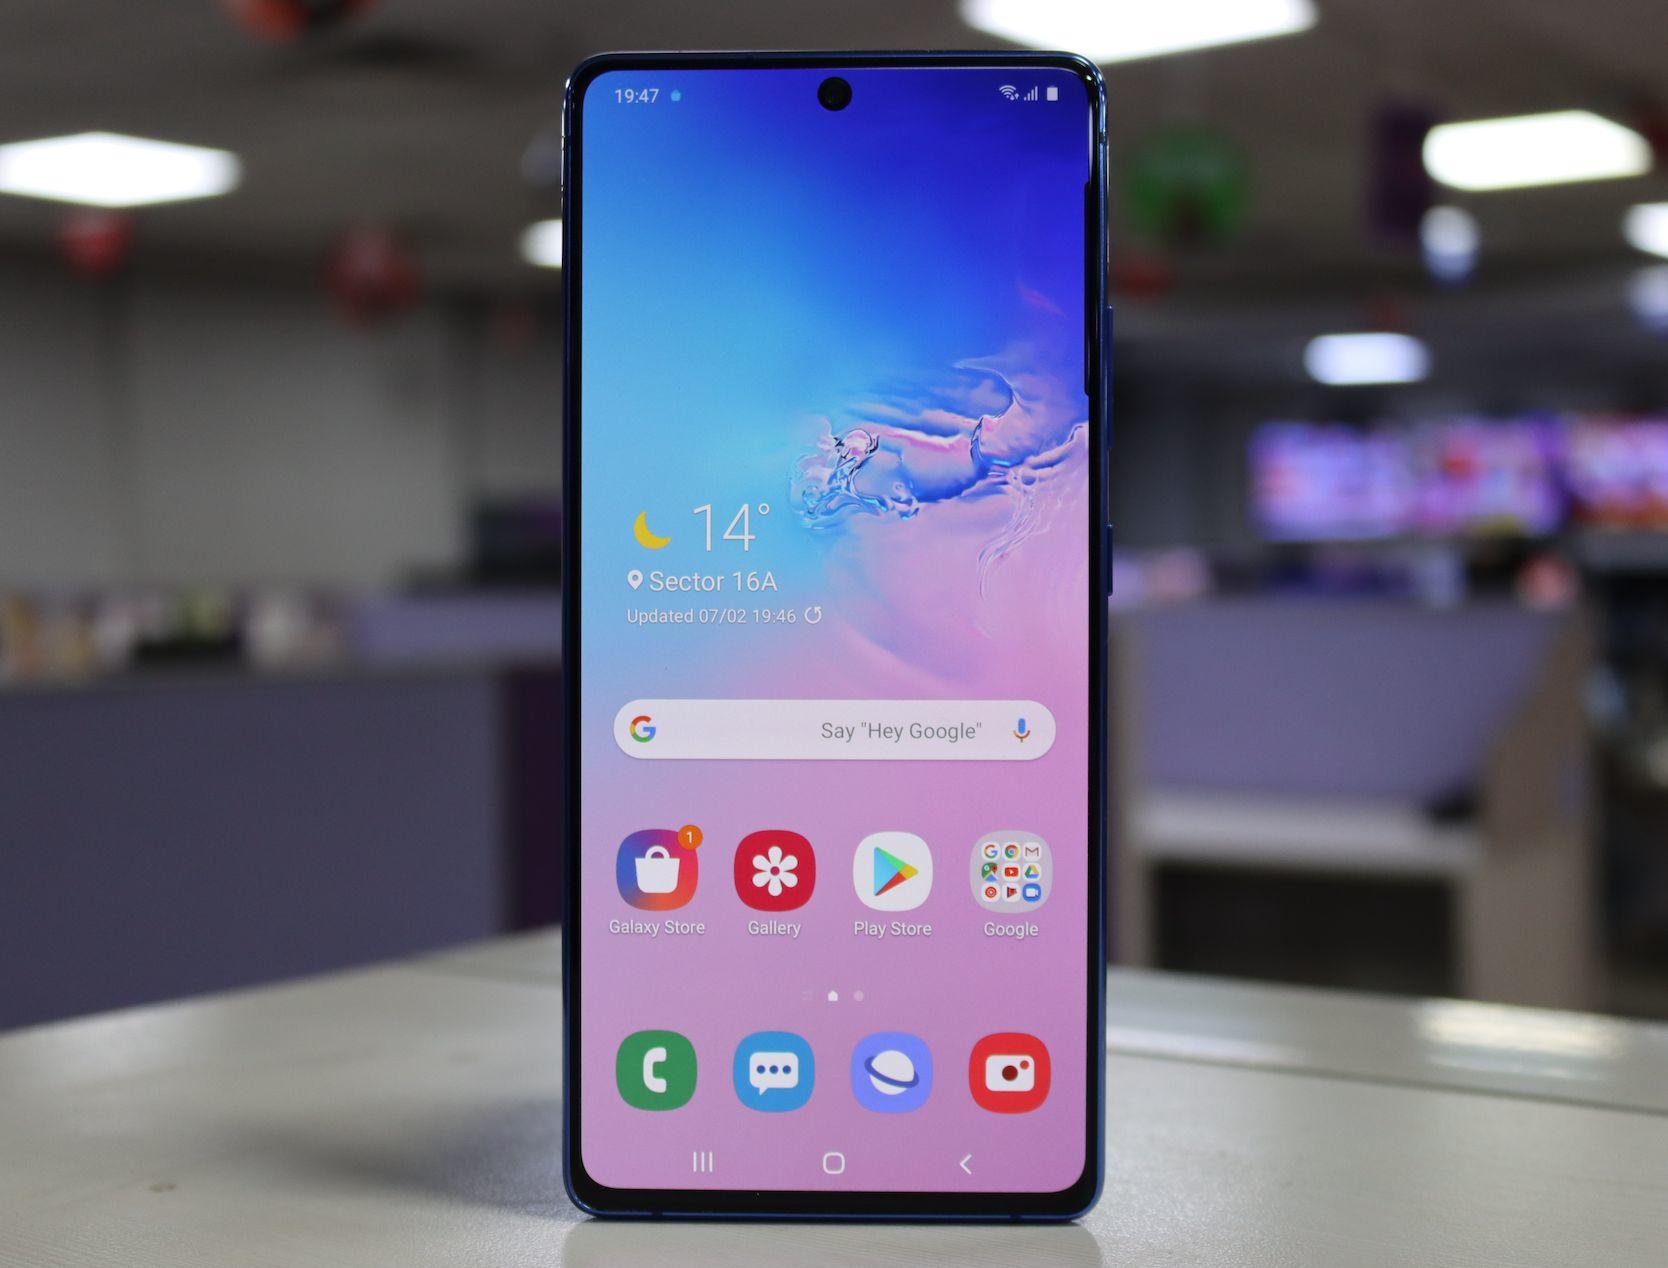 Samsung Galaxy S10 Lite comes with one of the best displays in the price range of under Rs 40,000